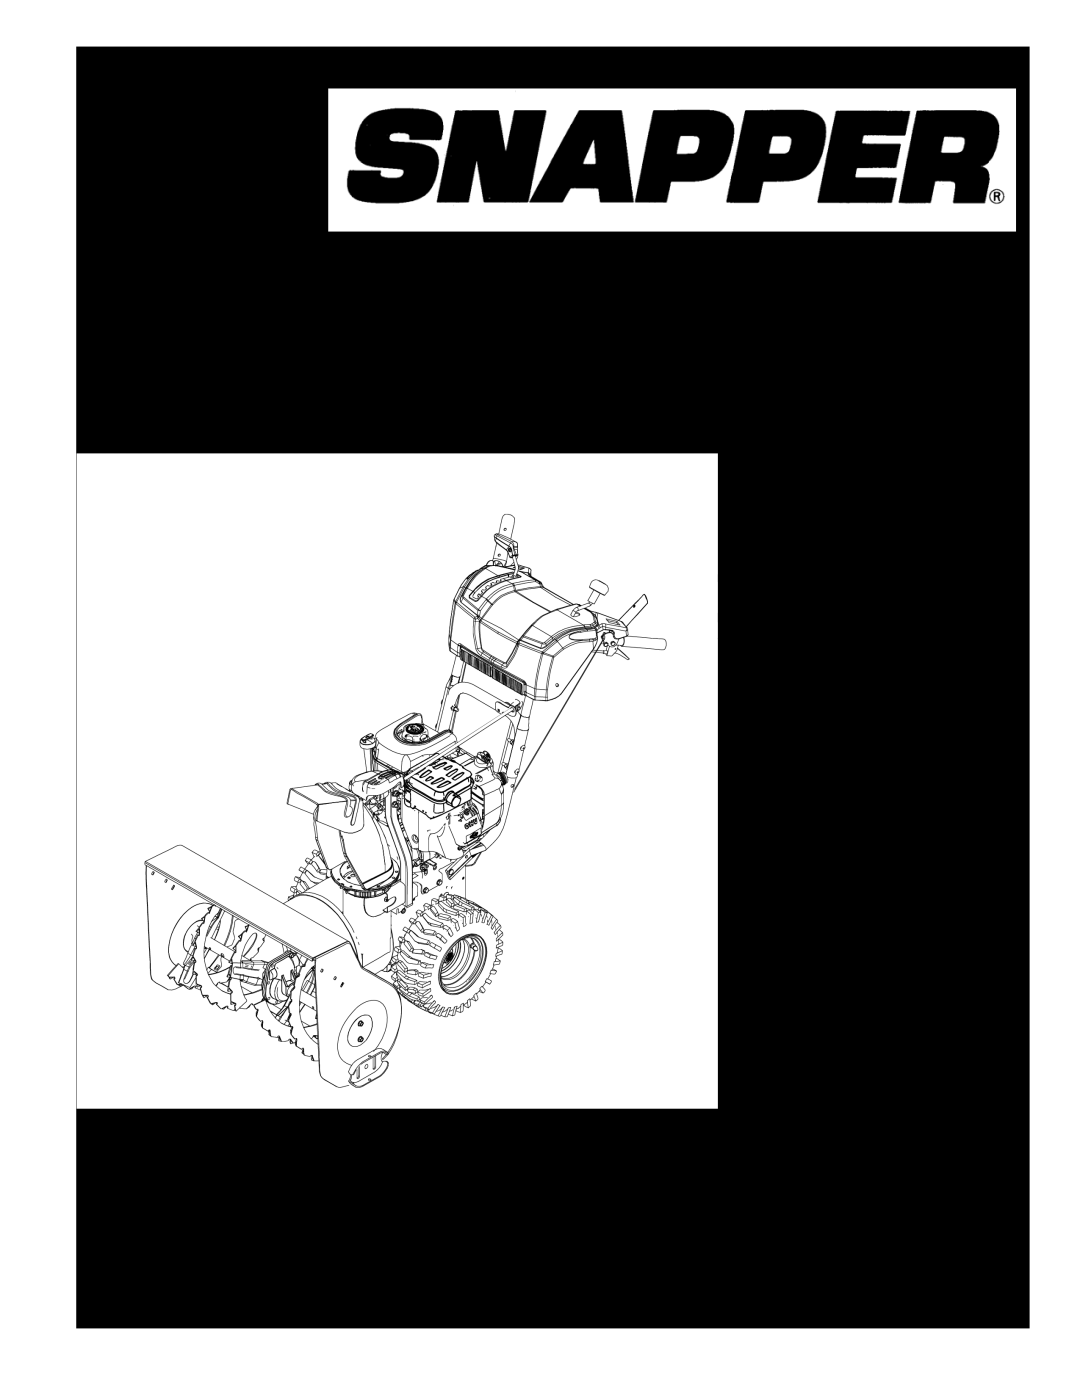 Snapper 1696000 manual NotReproductorfion, 24 9TP TWO STAGE INTERMEDIATE SNOWTHROWER, Parts Manual for, Manual No, 7105282 